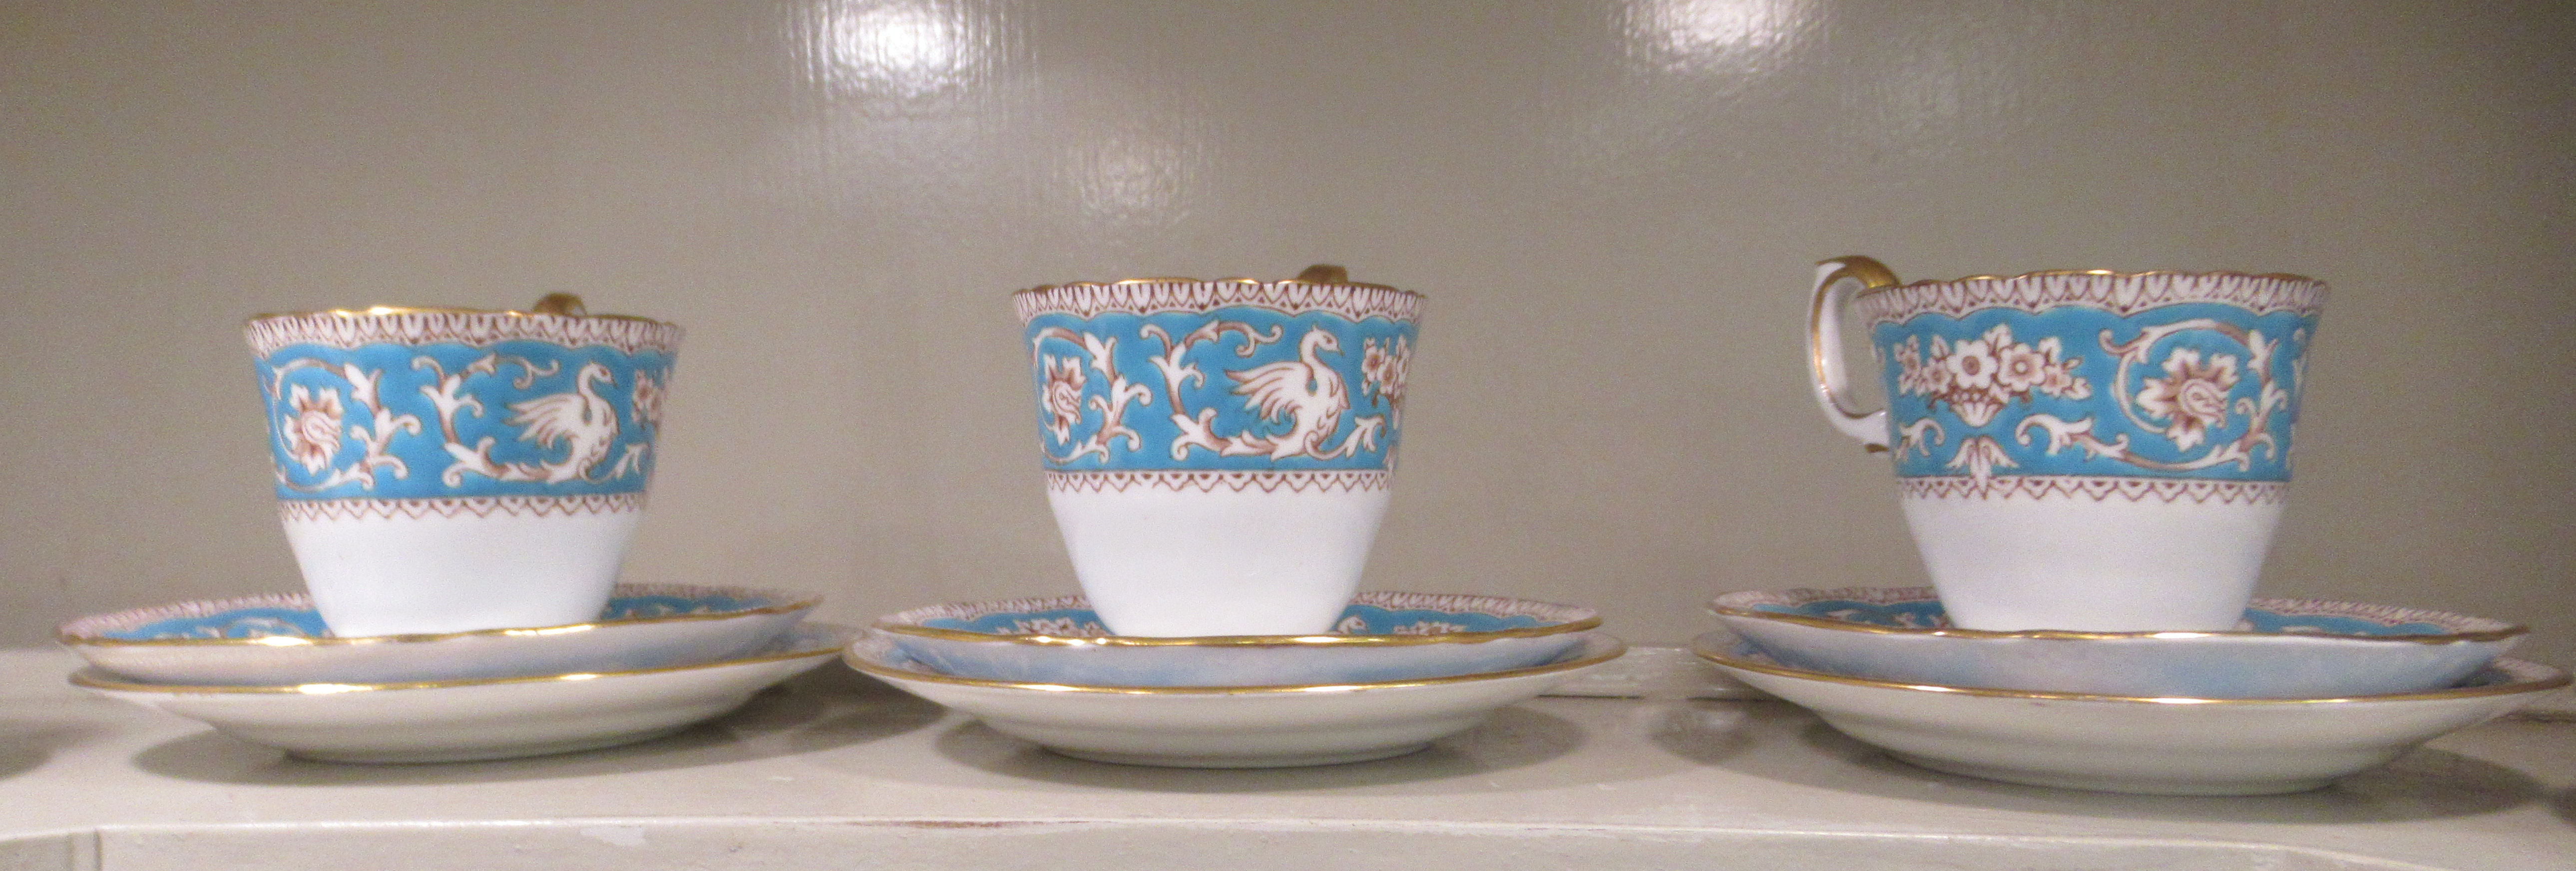 Ceramics: to include a 1930s Art Deco Burleigh Ware china Belvedere pattern coffee set - Image 6 of 8